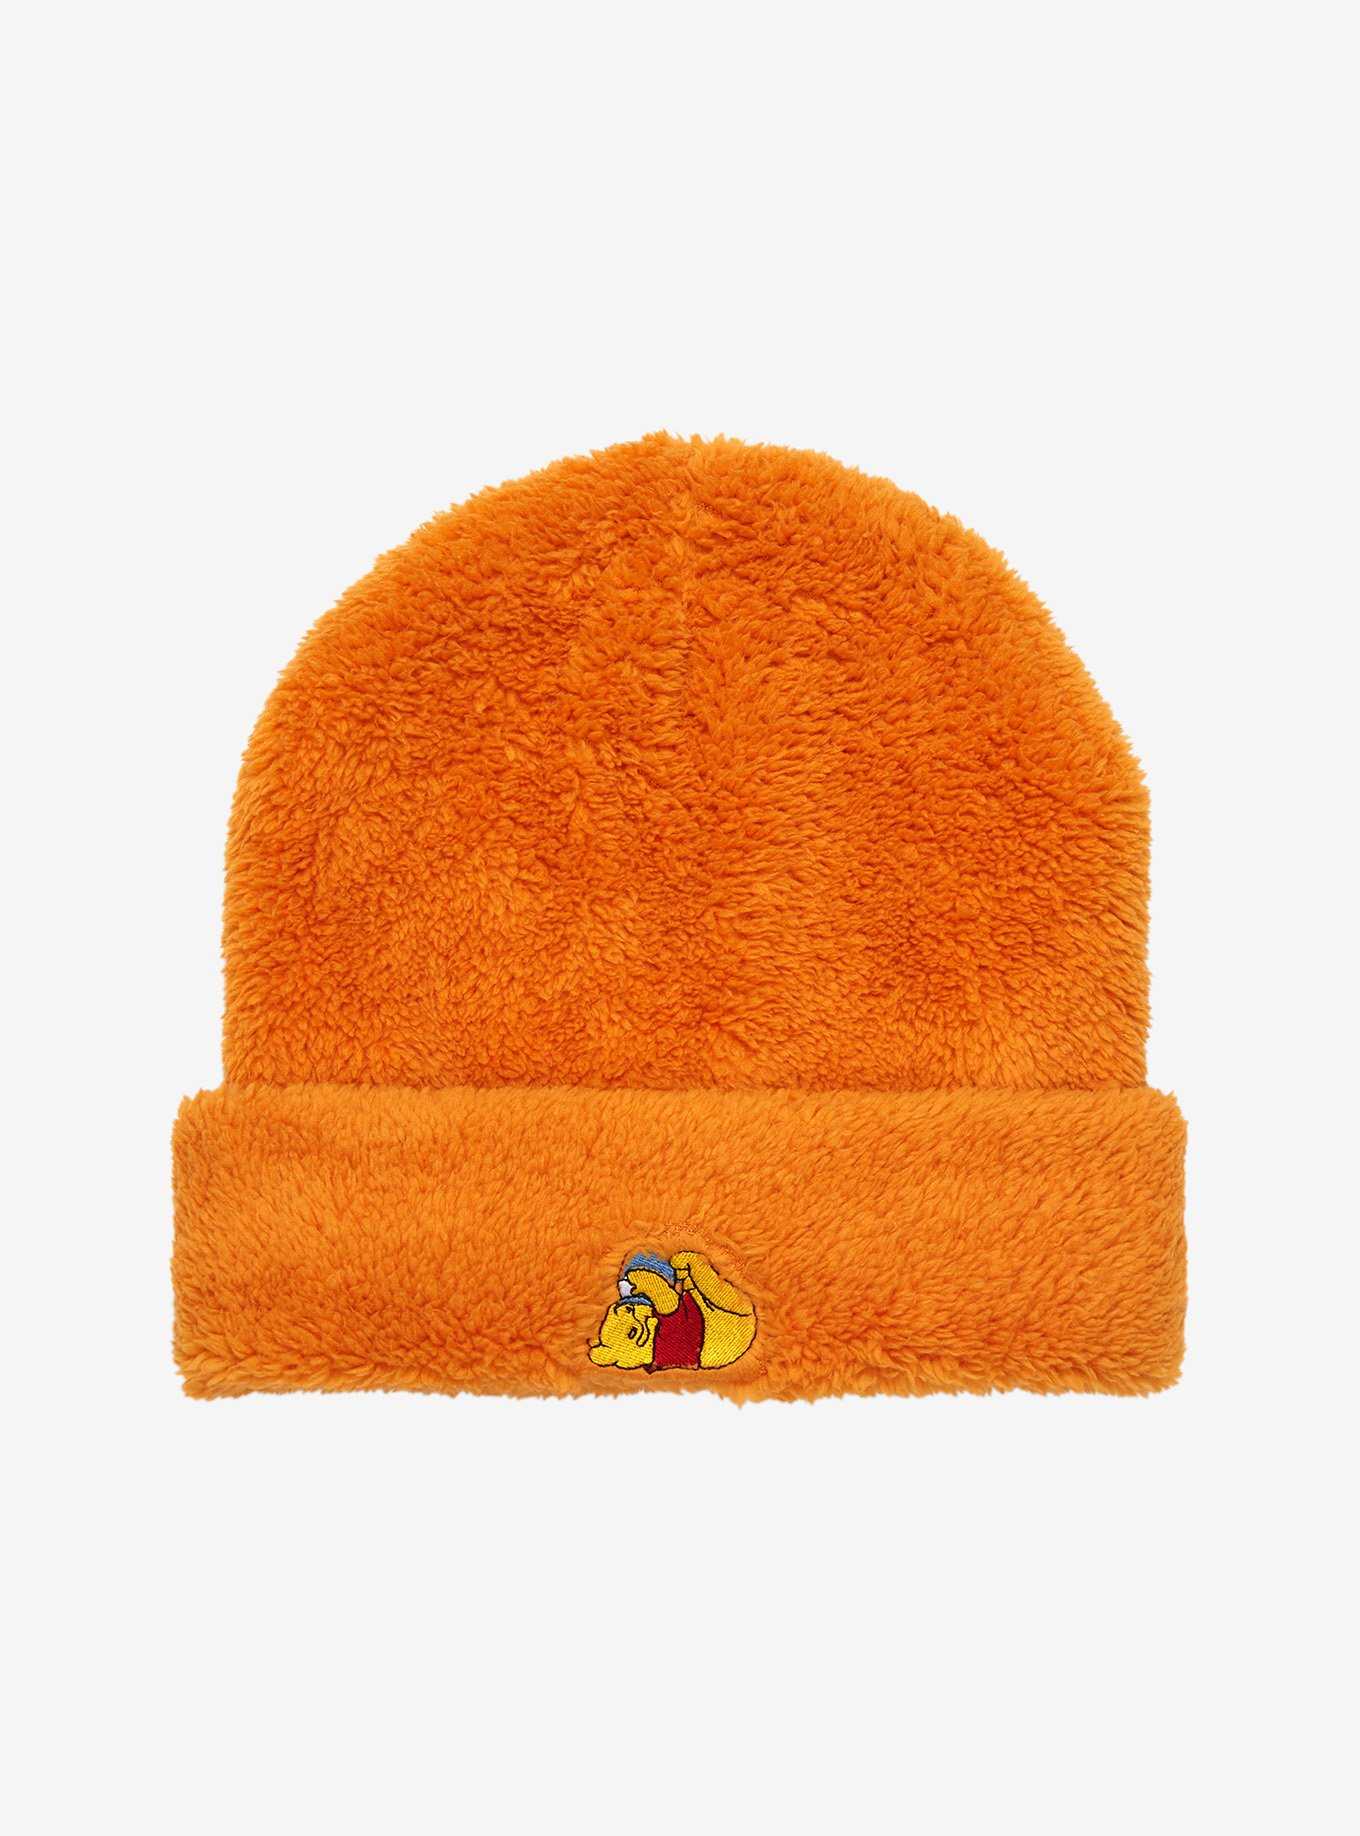 Disney Winnie the Pooh Hunny Pot Sherpa Cuff Beanie - BoxLunch Exclusive, , hi-res